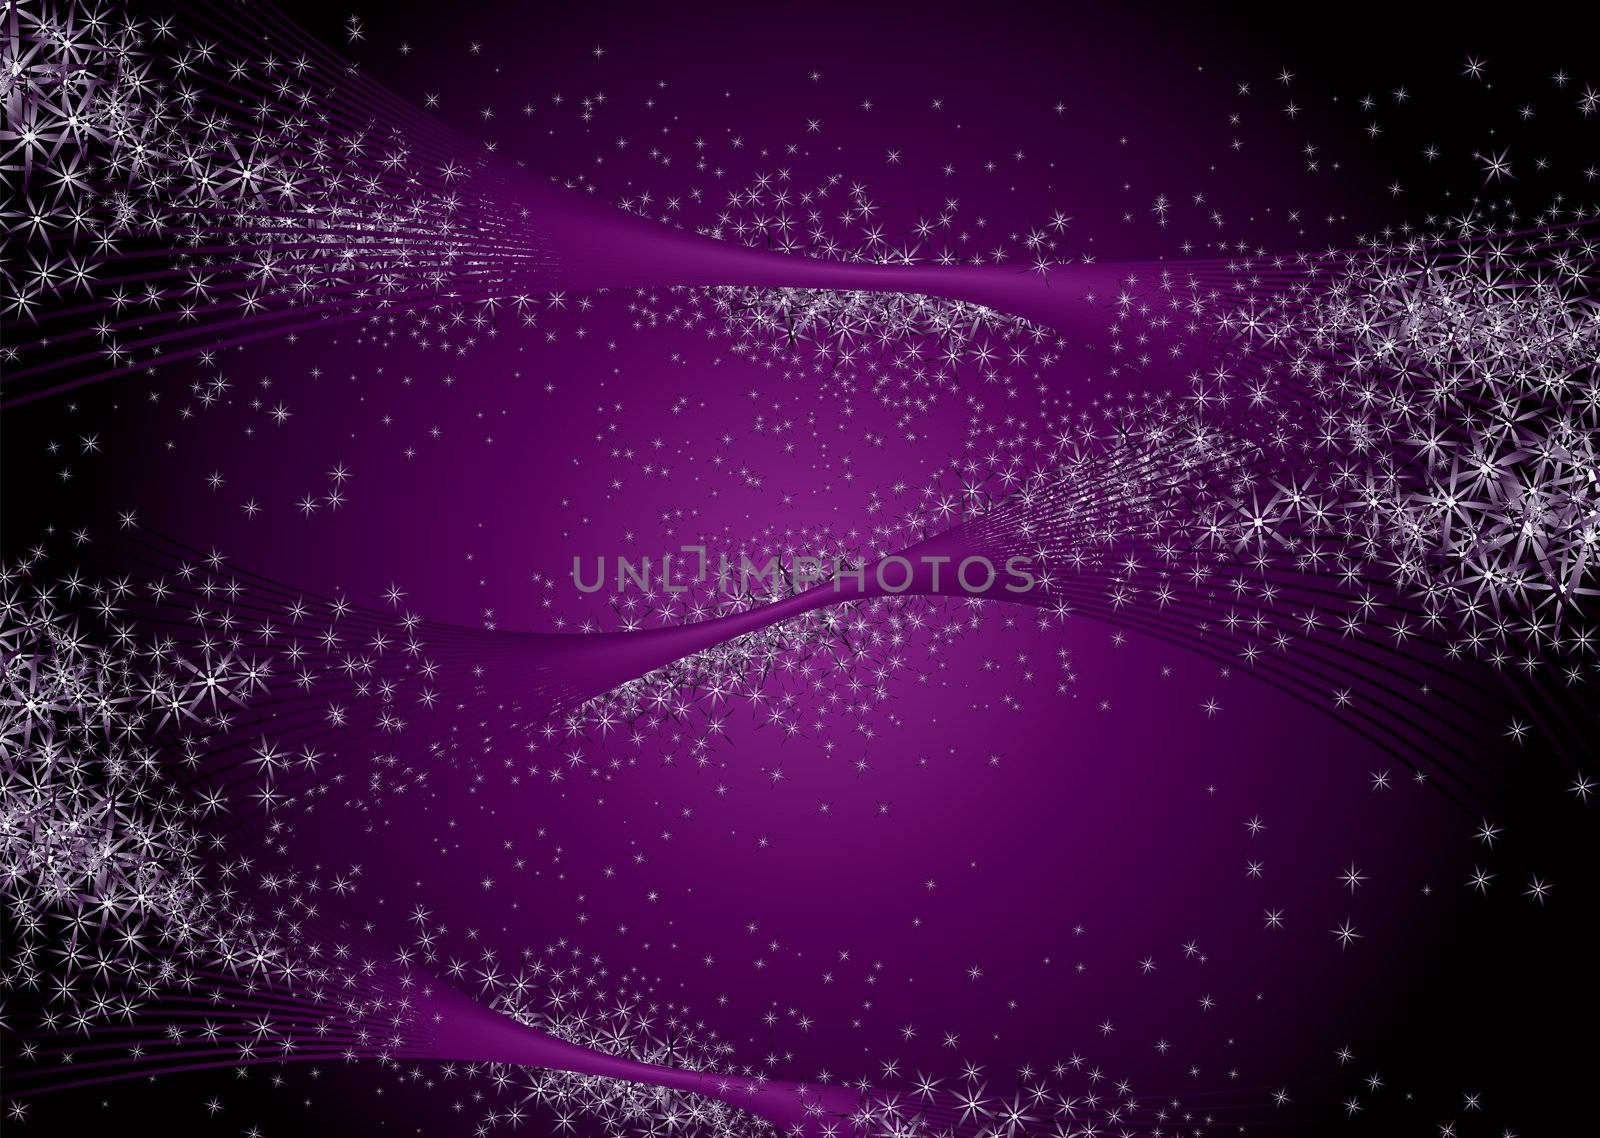 Inter galactic abstract star background in purple and magenta